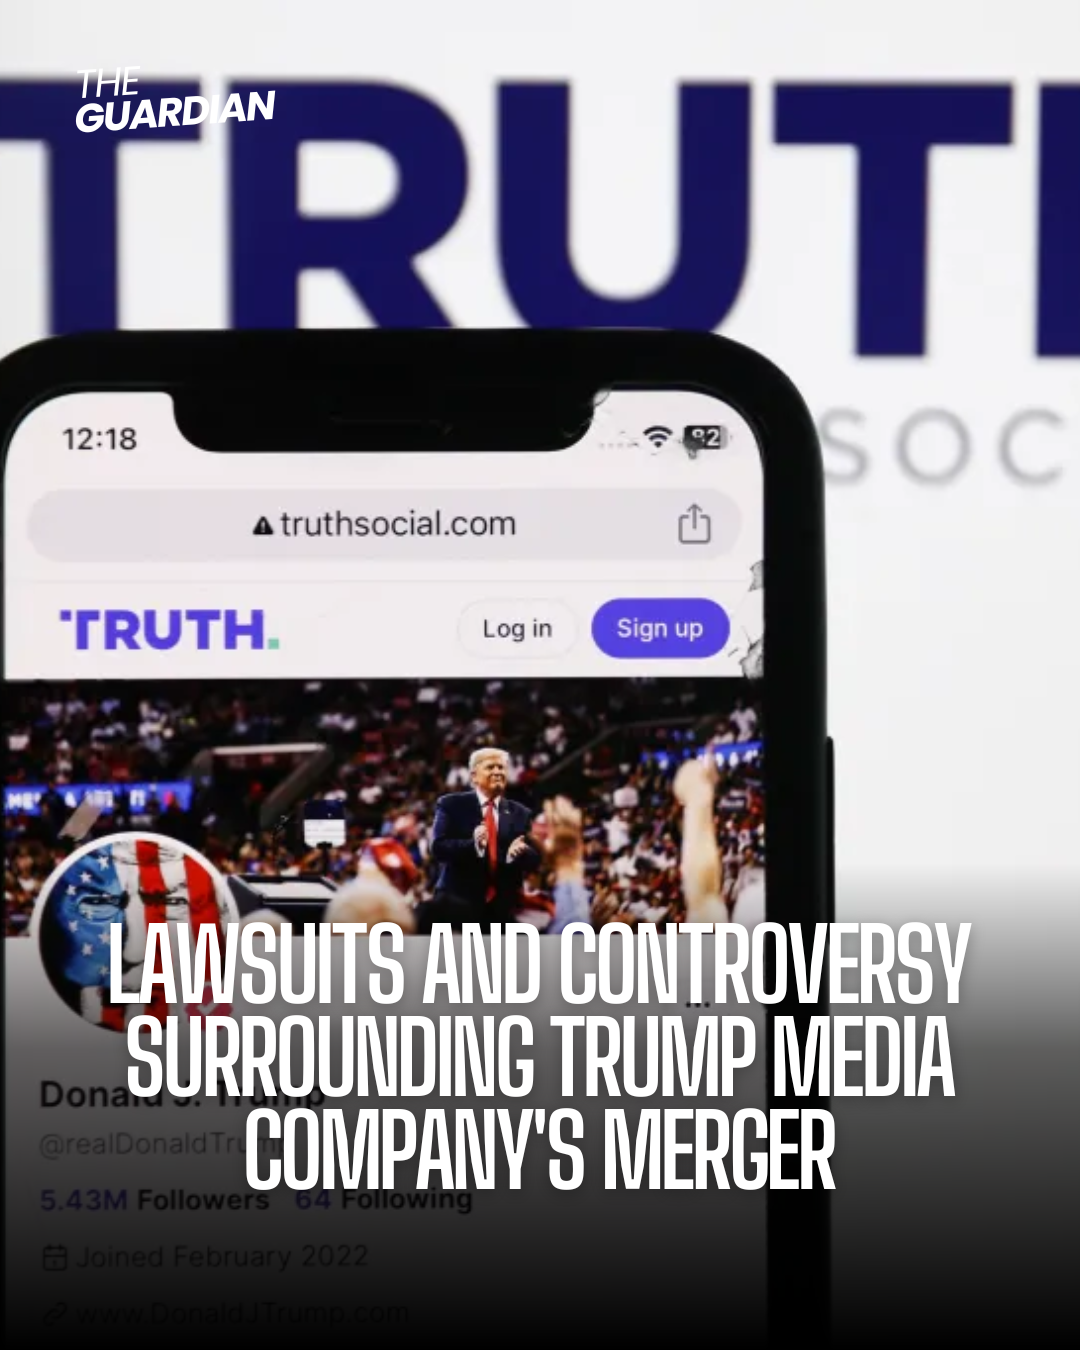 A former official of the blank-check acquisition vehicle aimed at taking Donald Trump's social networking company public has launched a lawsuit to block the deal.